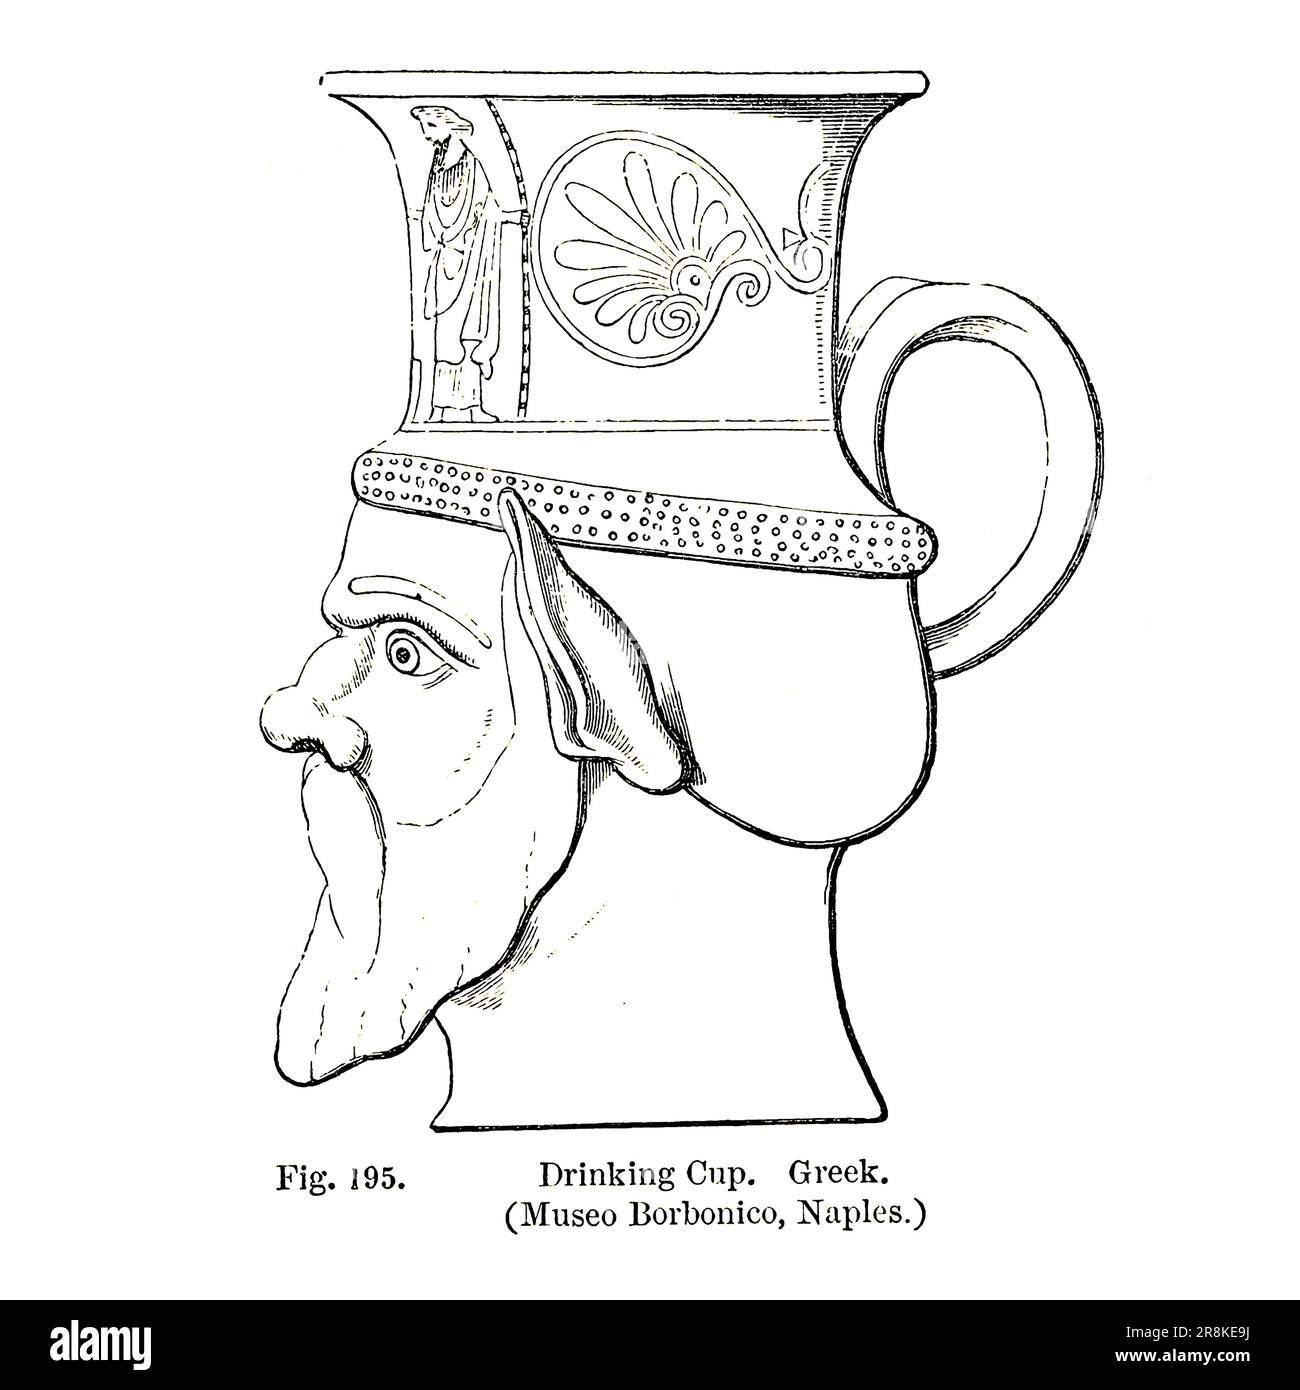 Drinking Cup, Greek Head, Greece from the book ' A history of pottery and porcelain, mediaeval and modern ' by Joseph Marryat, Published in London by John Murray, Albemarle Street in 1857 Stock Photo